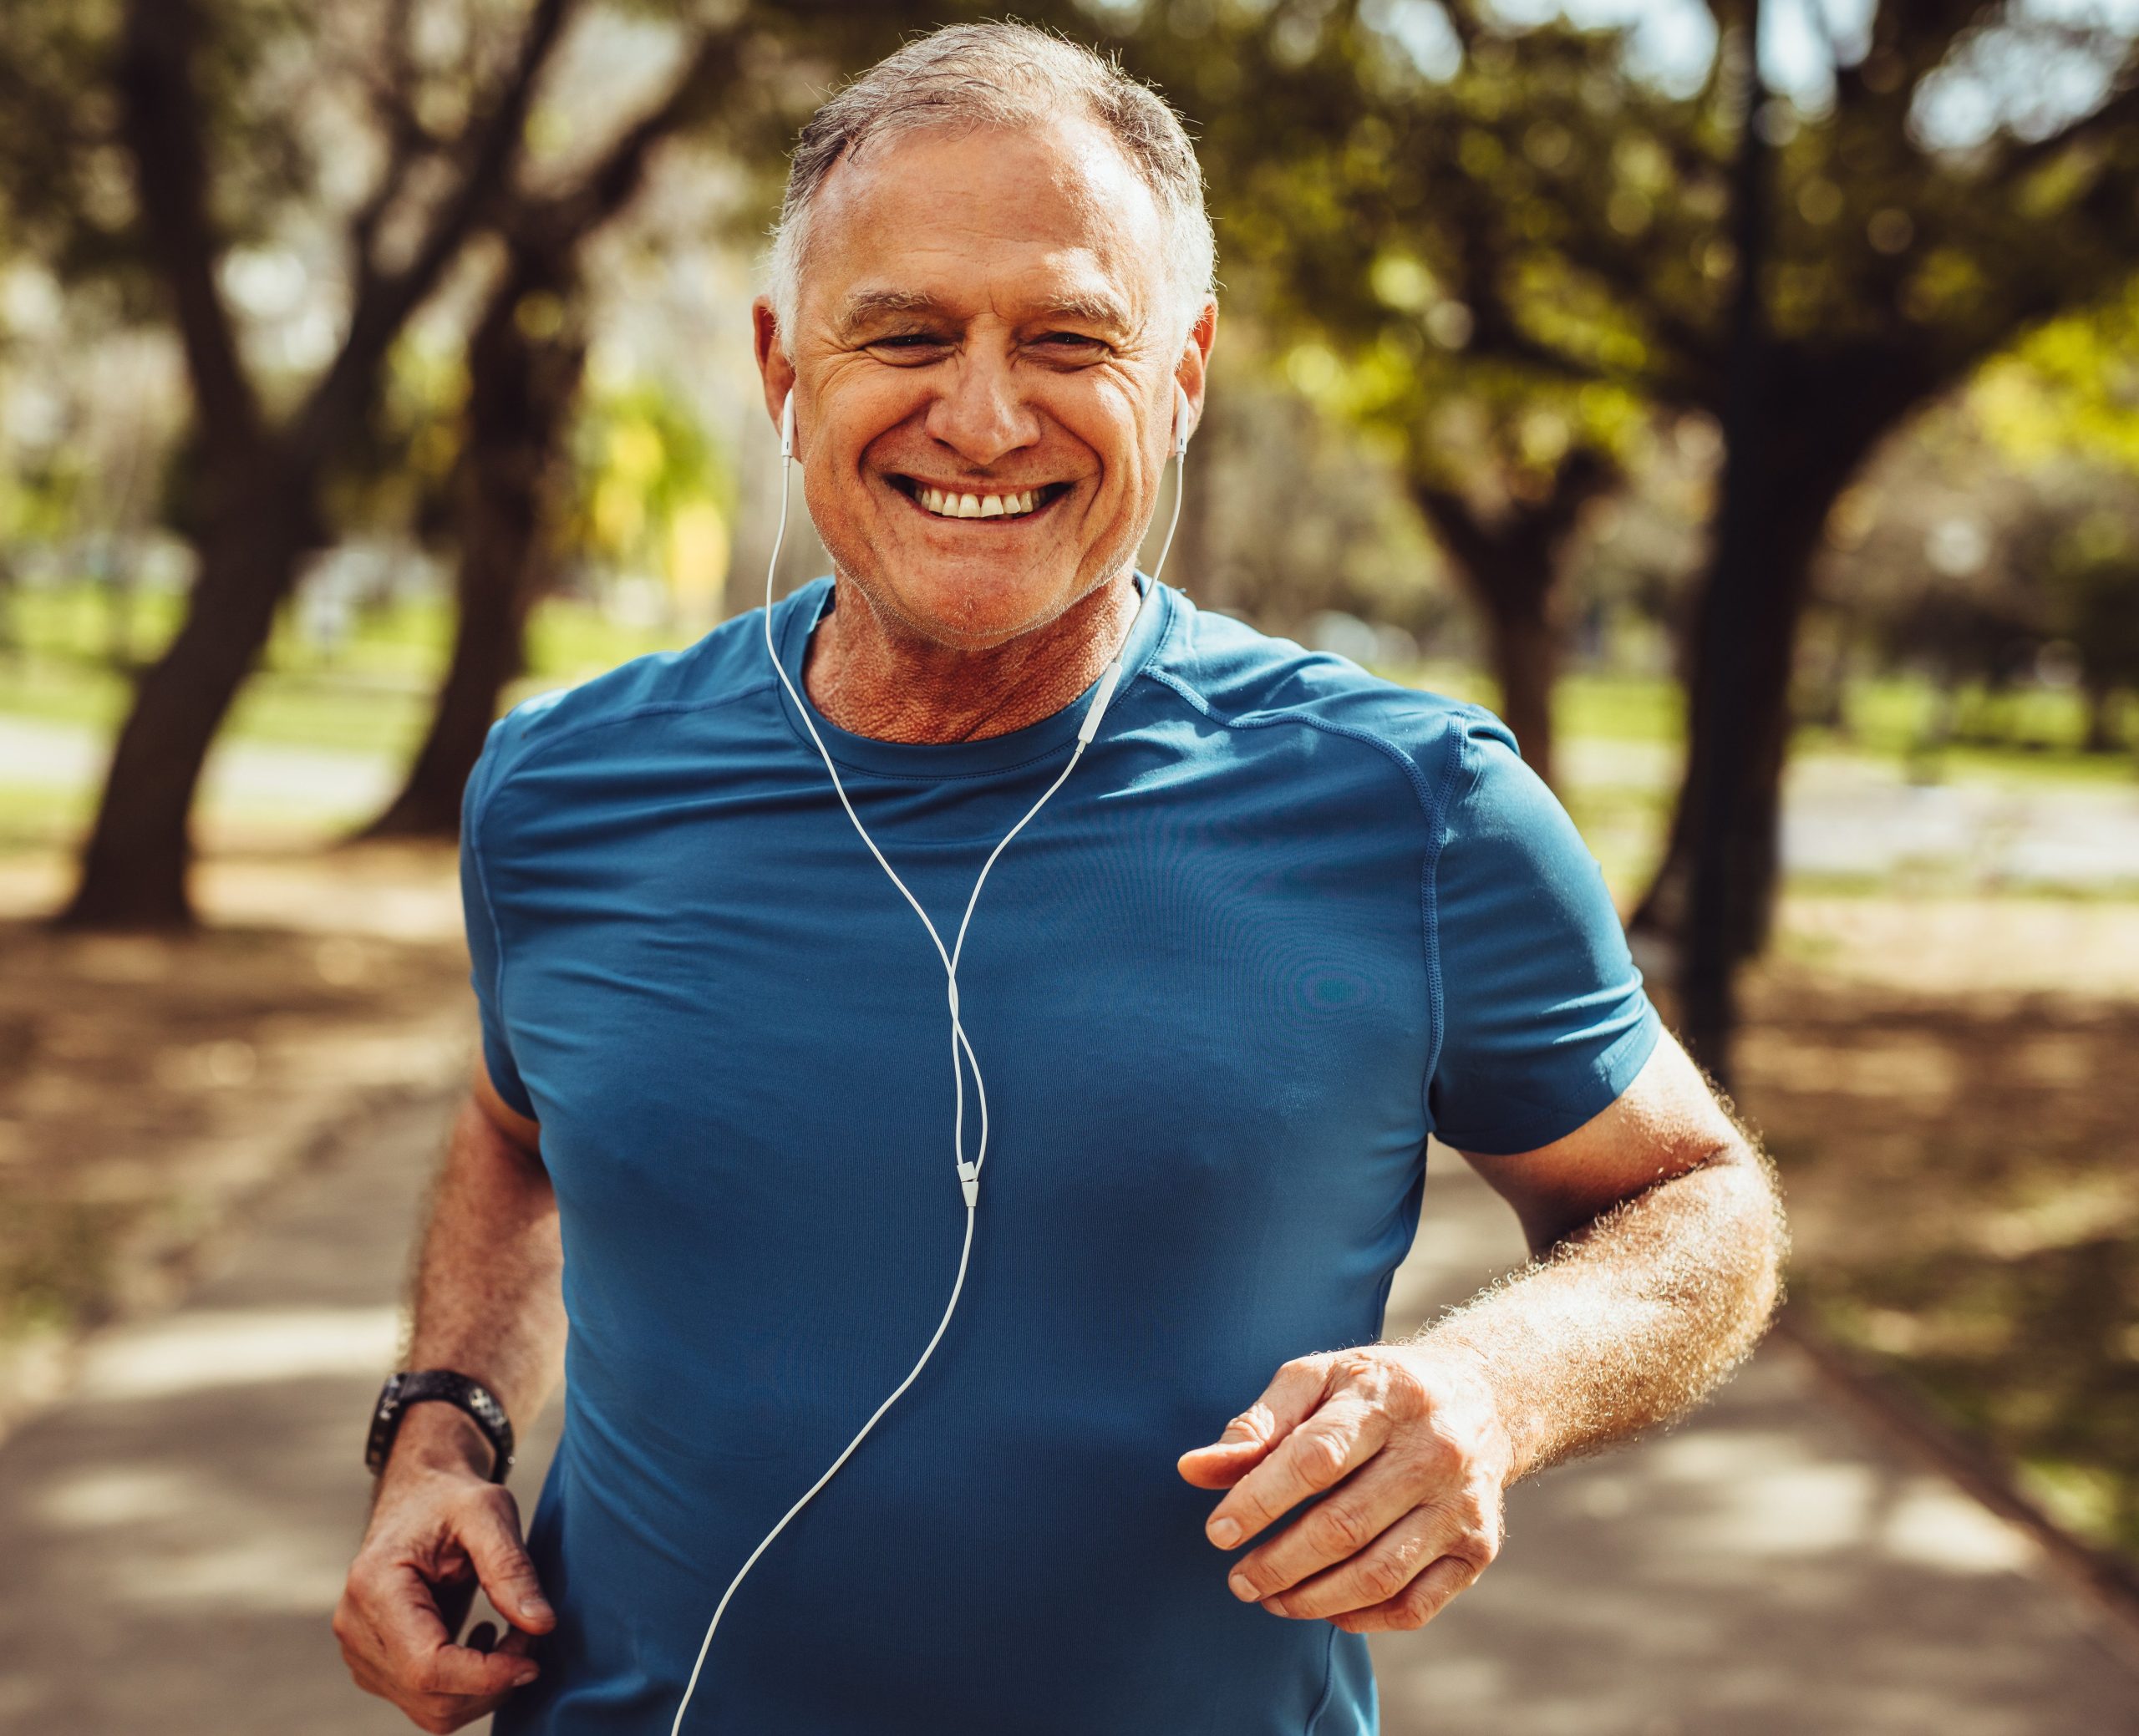 A healthy lifestyle reduces your dementia risk